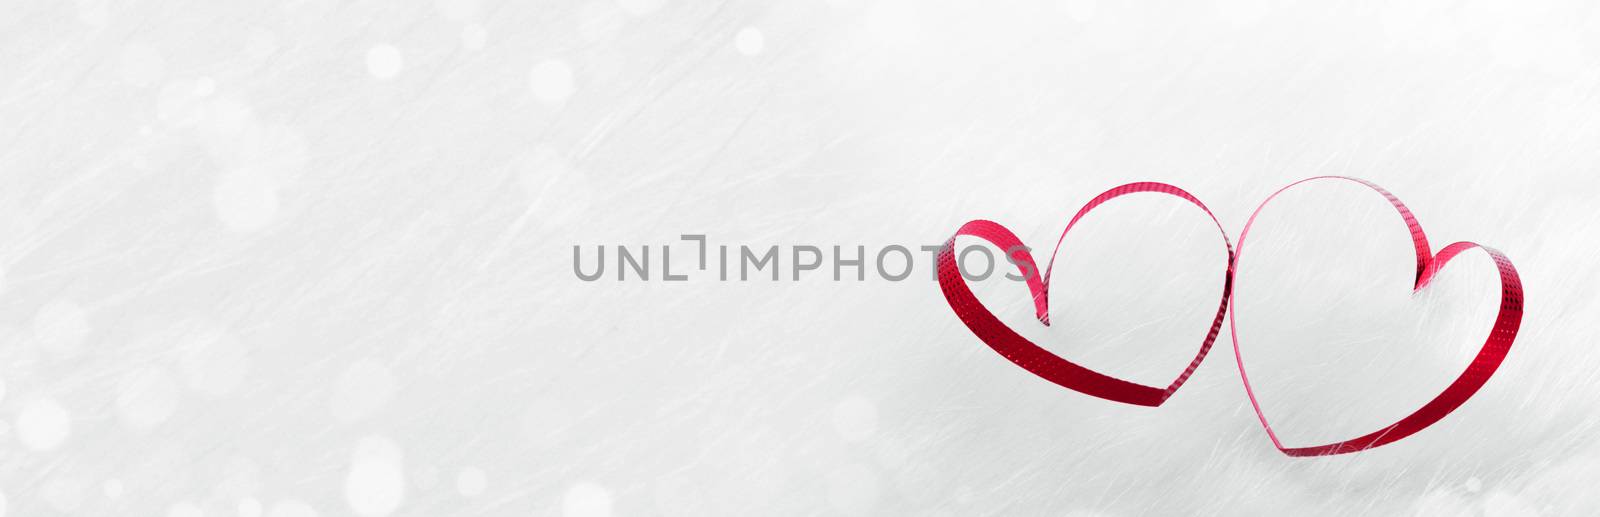 Red heart shaped ribbon on white fur background Valentines day design with copy space